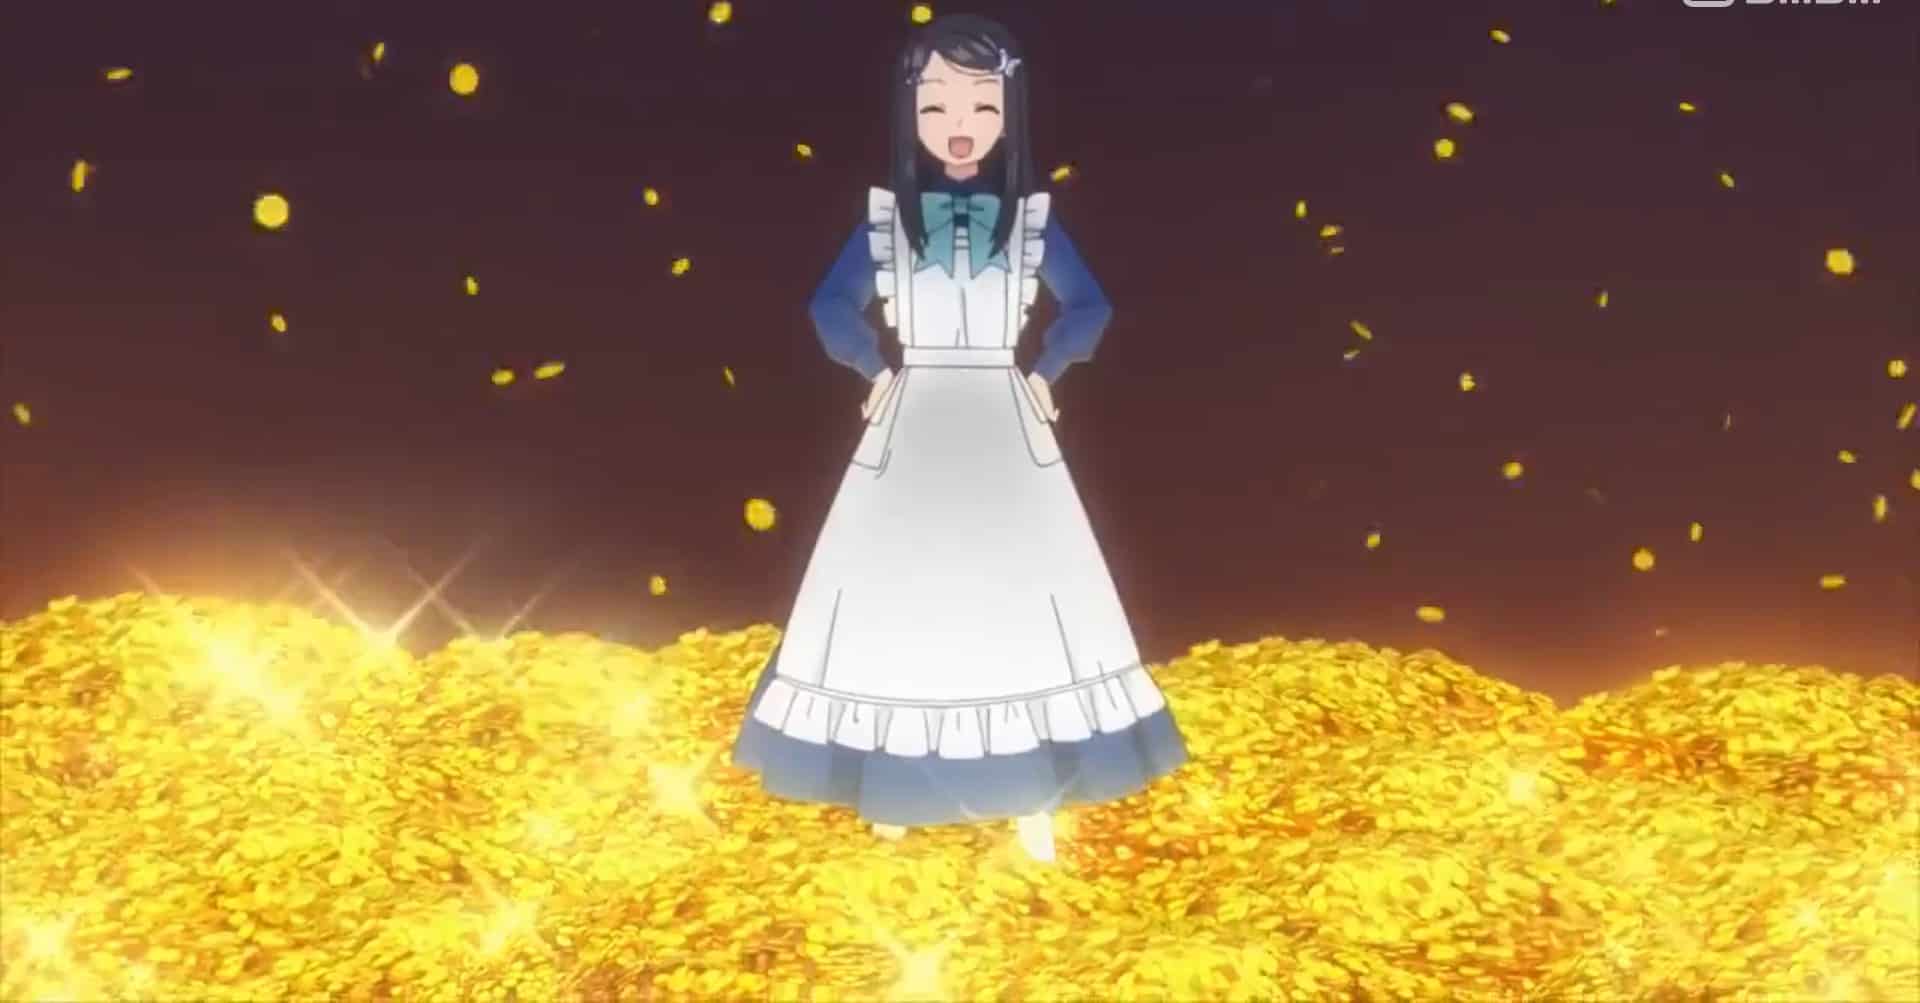 Saving 80,000 Gold in Another World for My Retirement Episode 11 Release Date